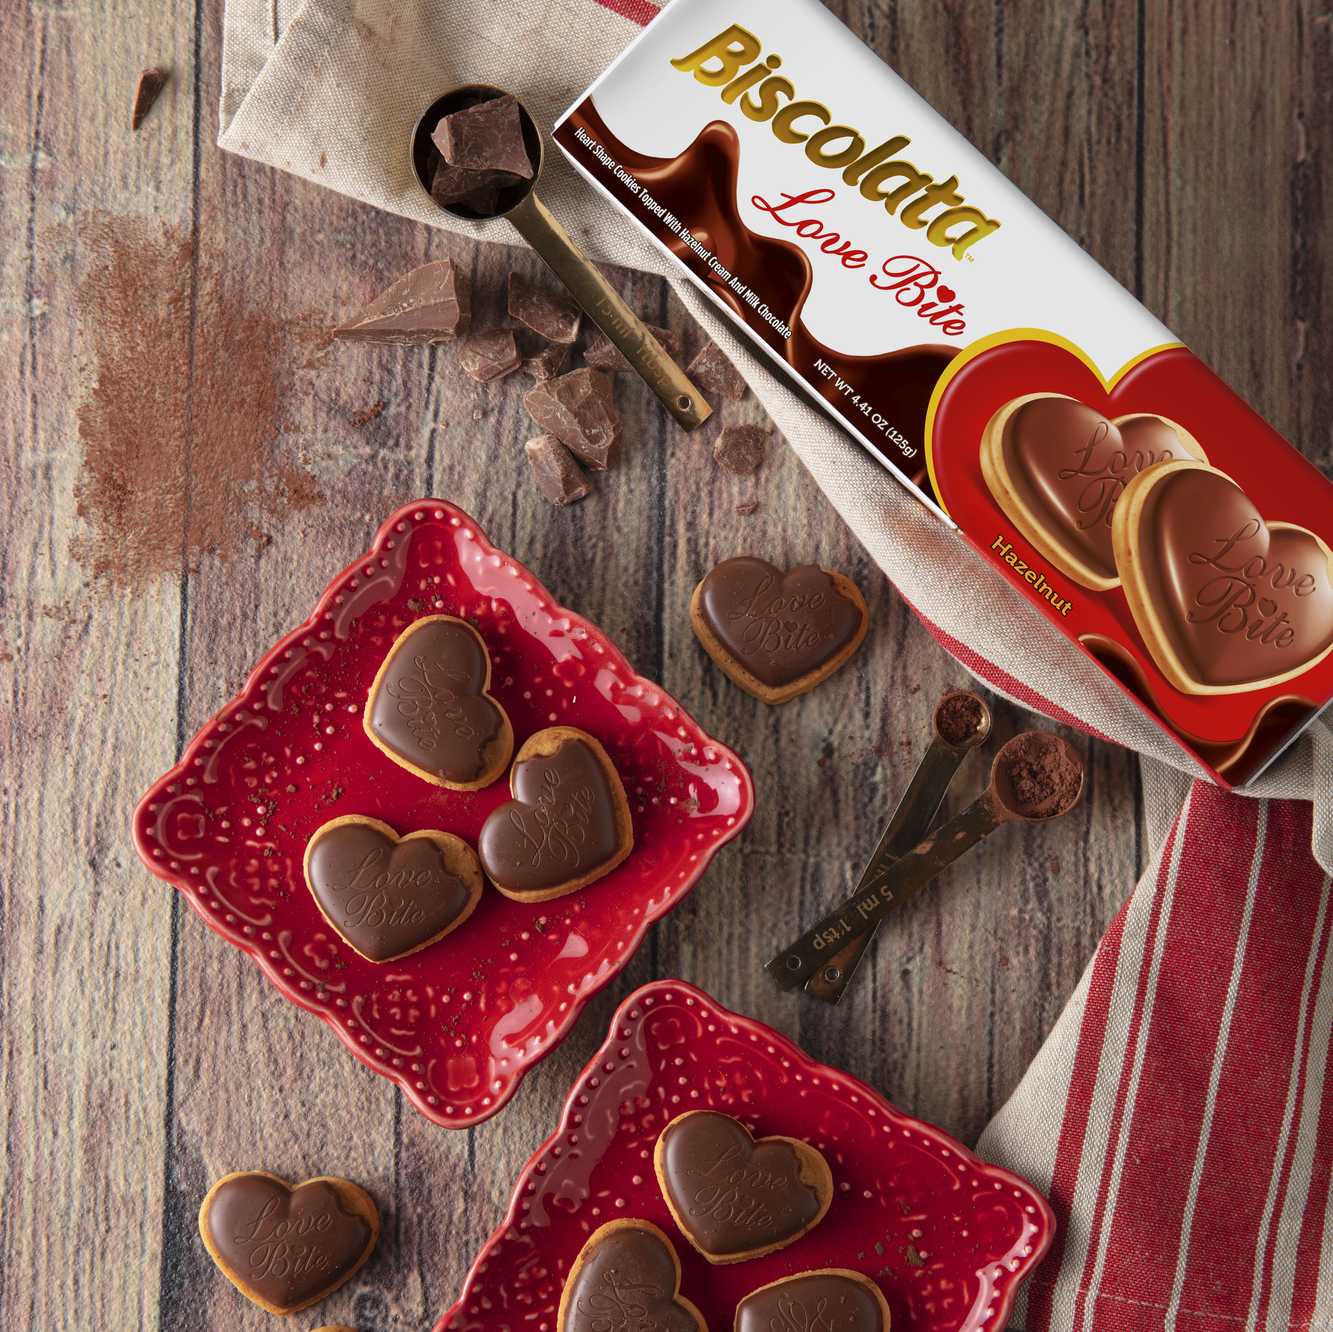 Biscolata chocolates - including Love Bites - are seeing a spike in sales on Amazon. Studies show chocolate may be a stress reliever. Something that provides a bit of a silver lining in the pandemic.